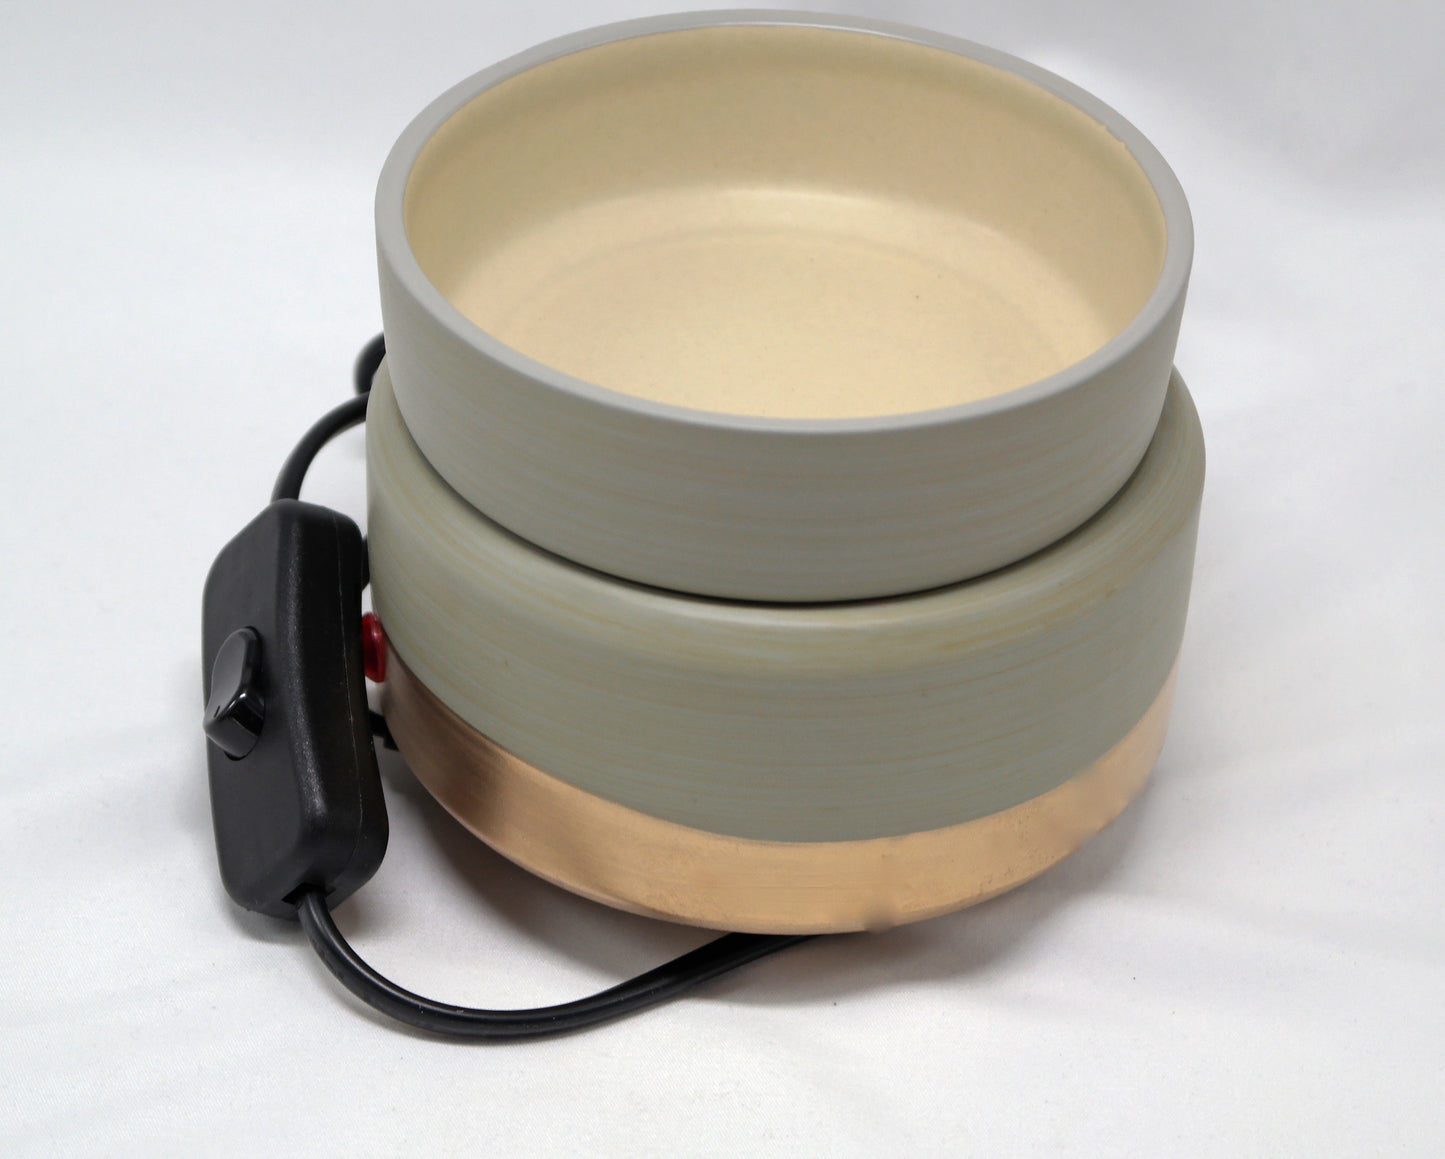 Grey & Rose Gold Electric Ceramic Wax Melter & Candle Warmer